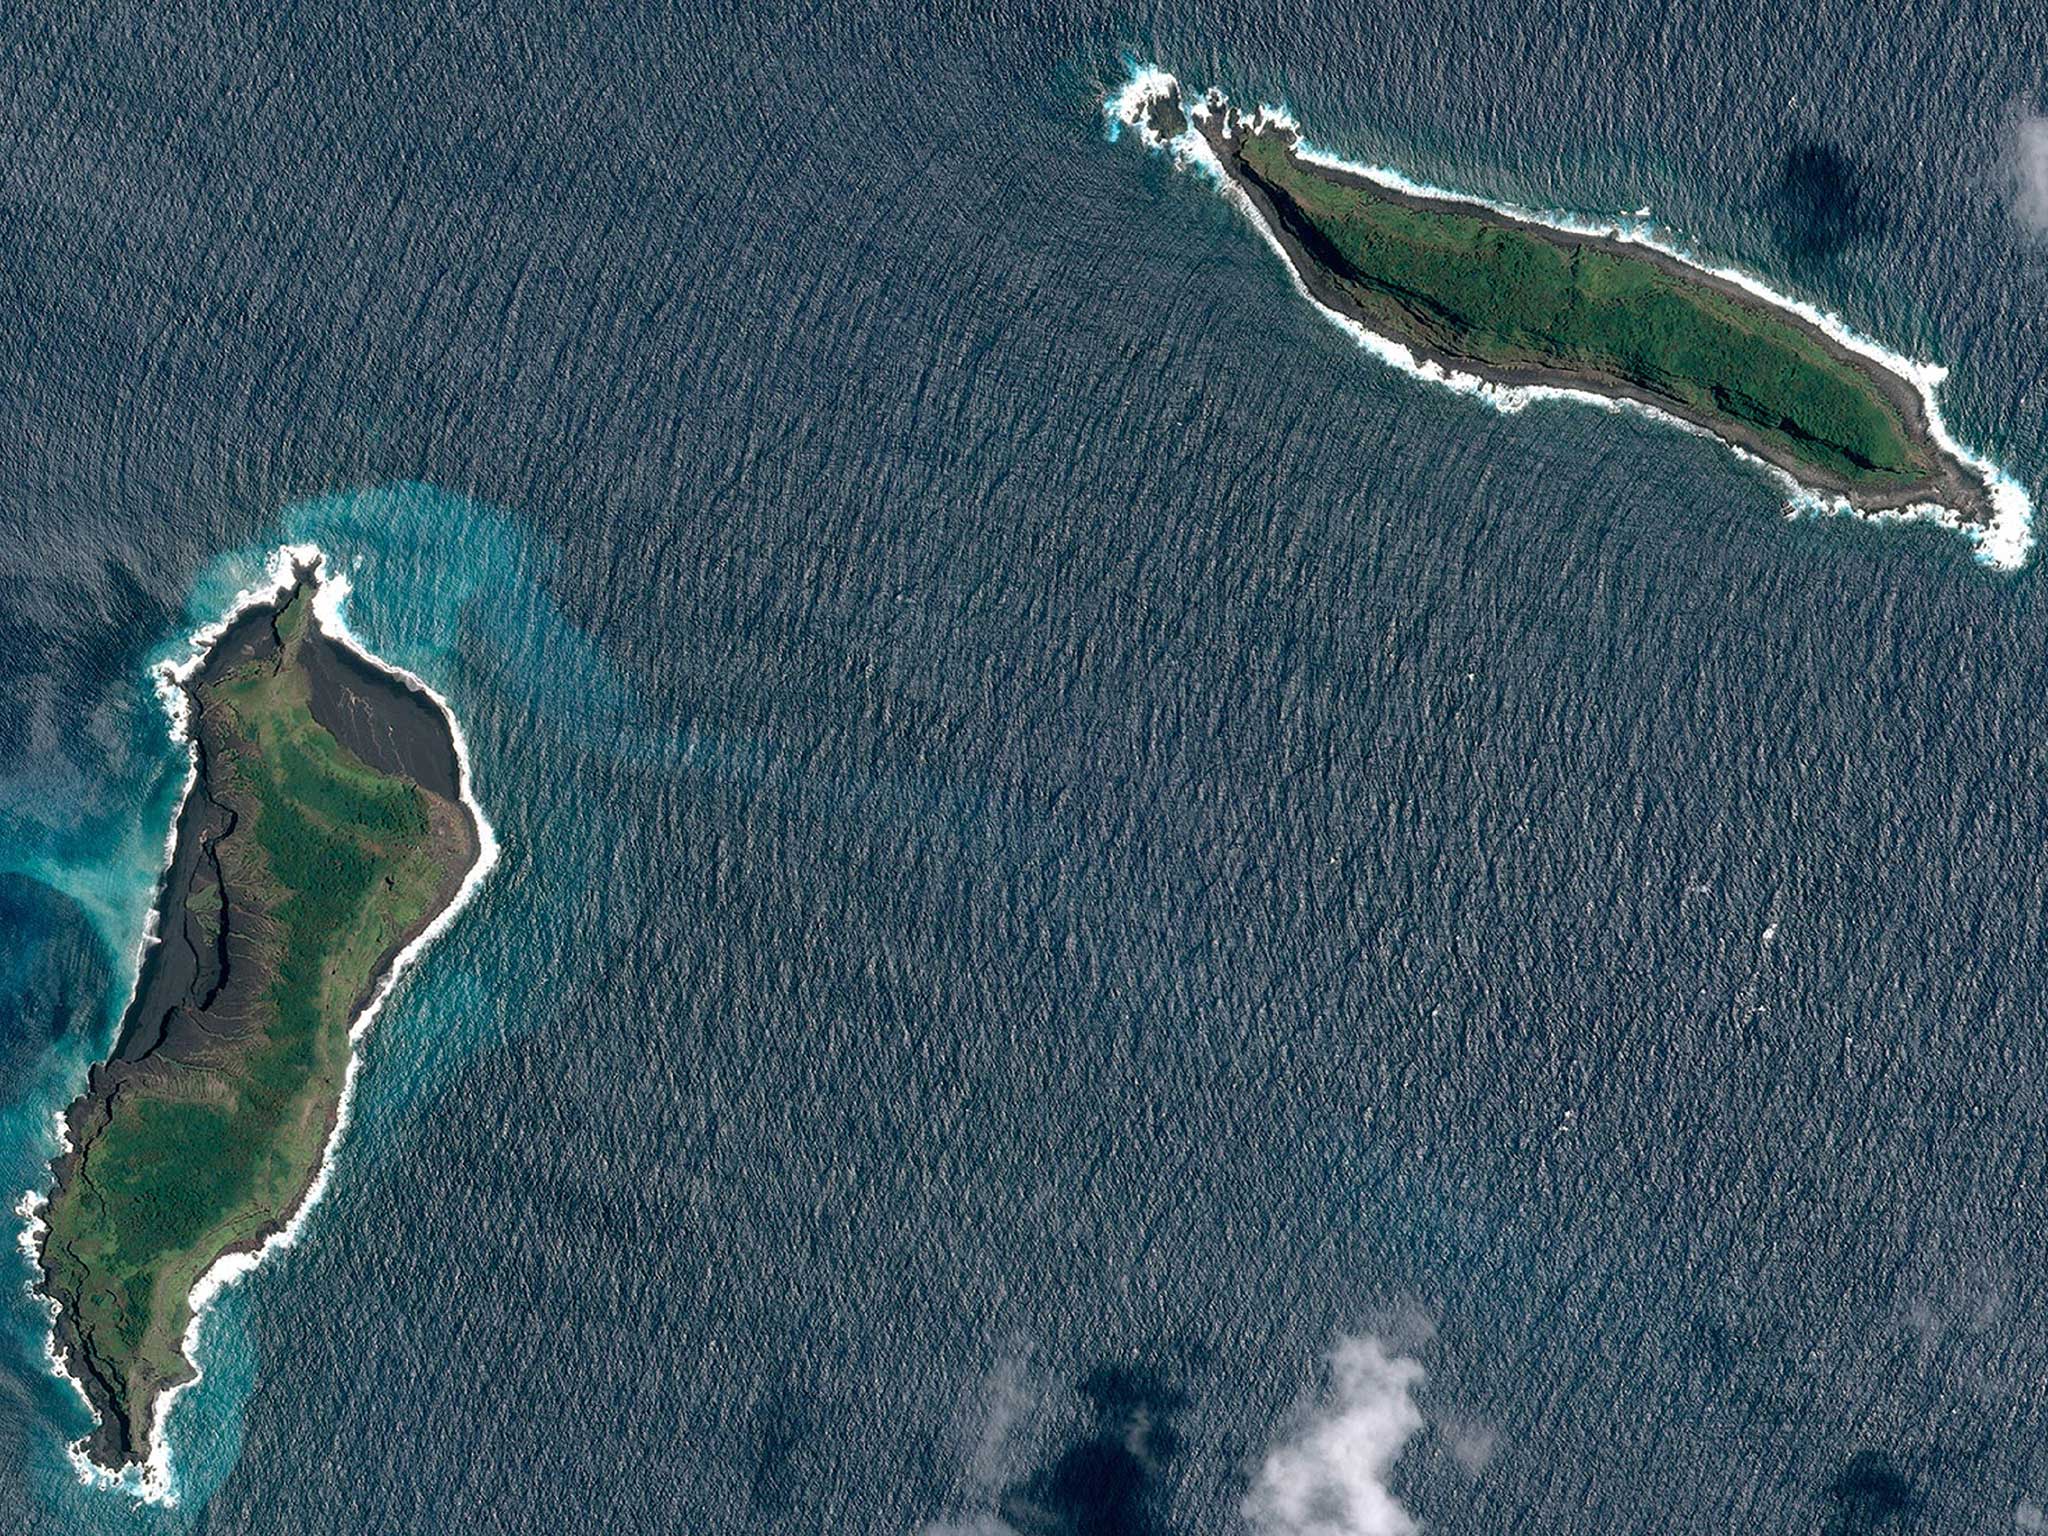 The two islands prior to the volcano's eruption